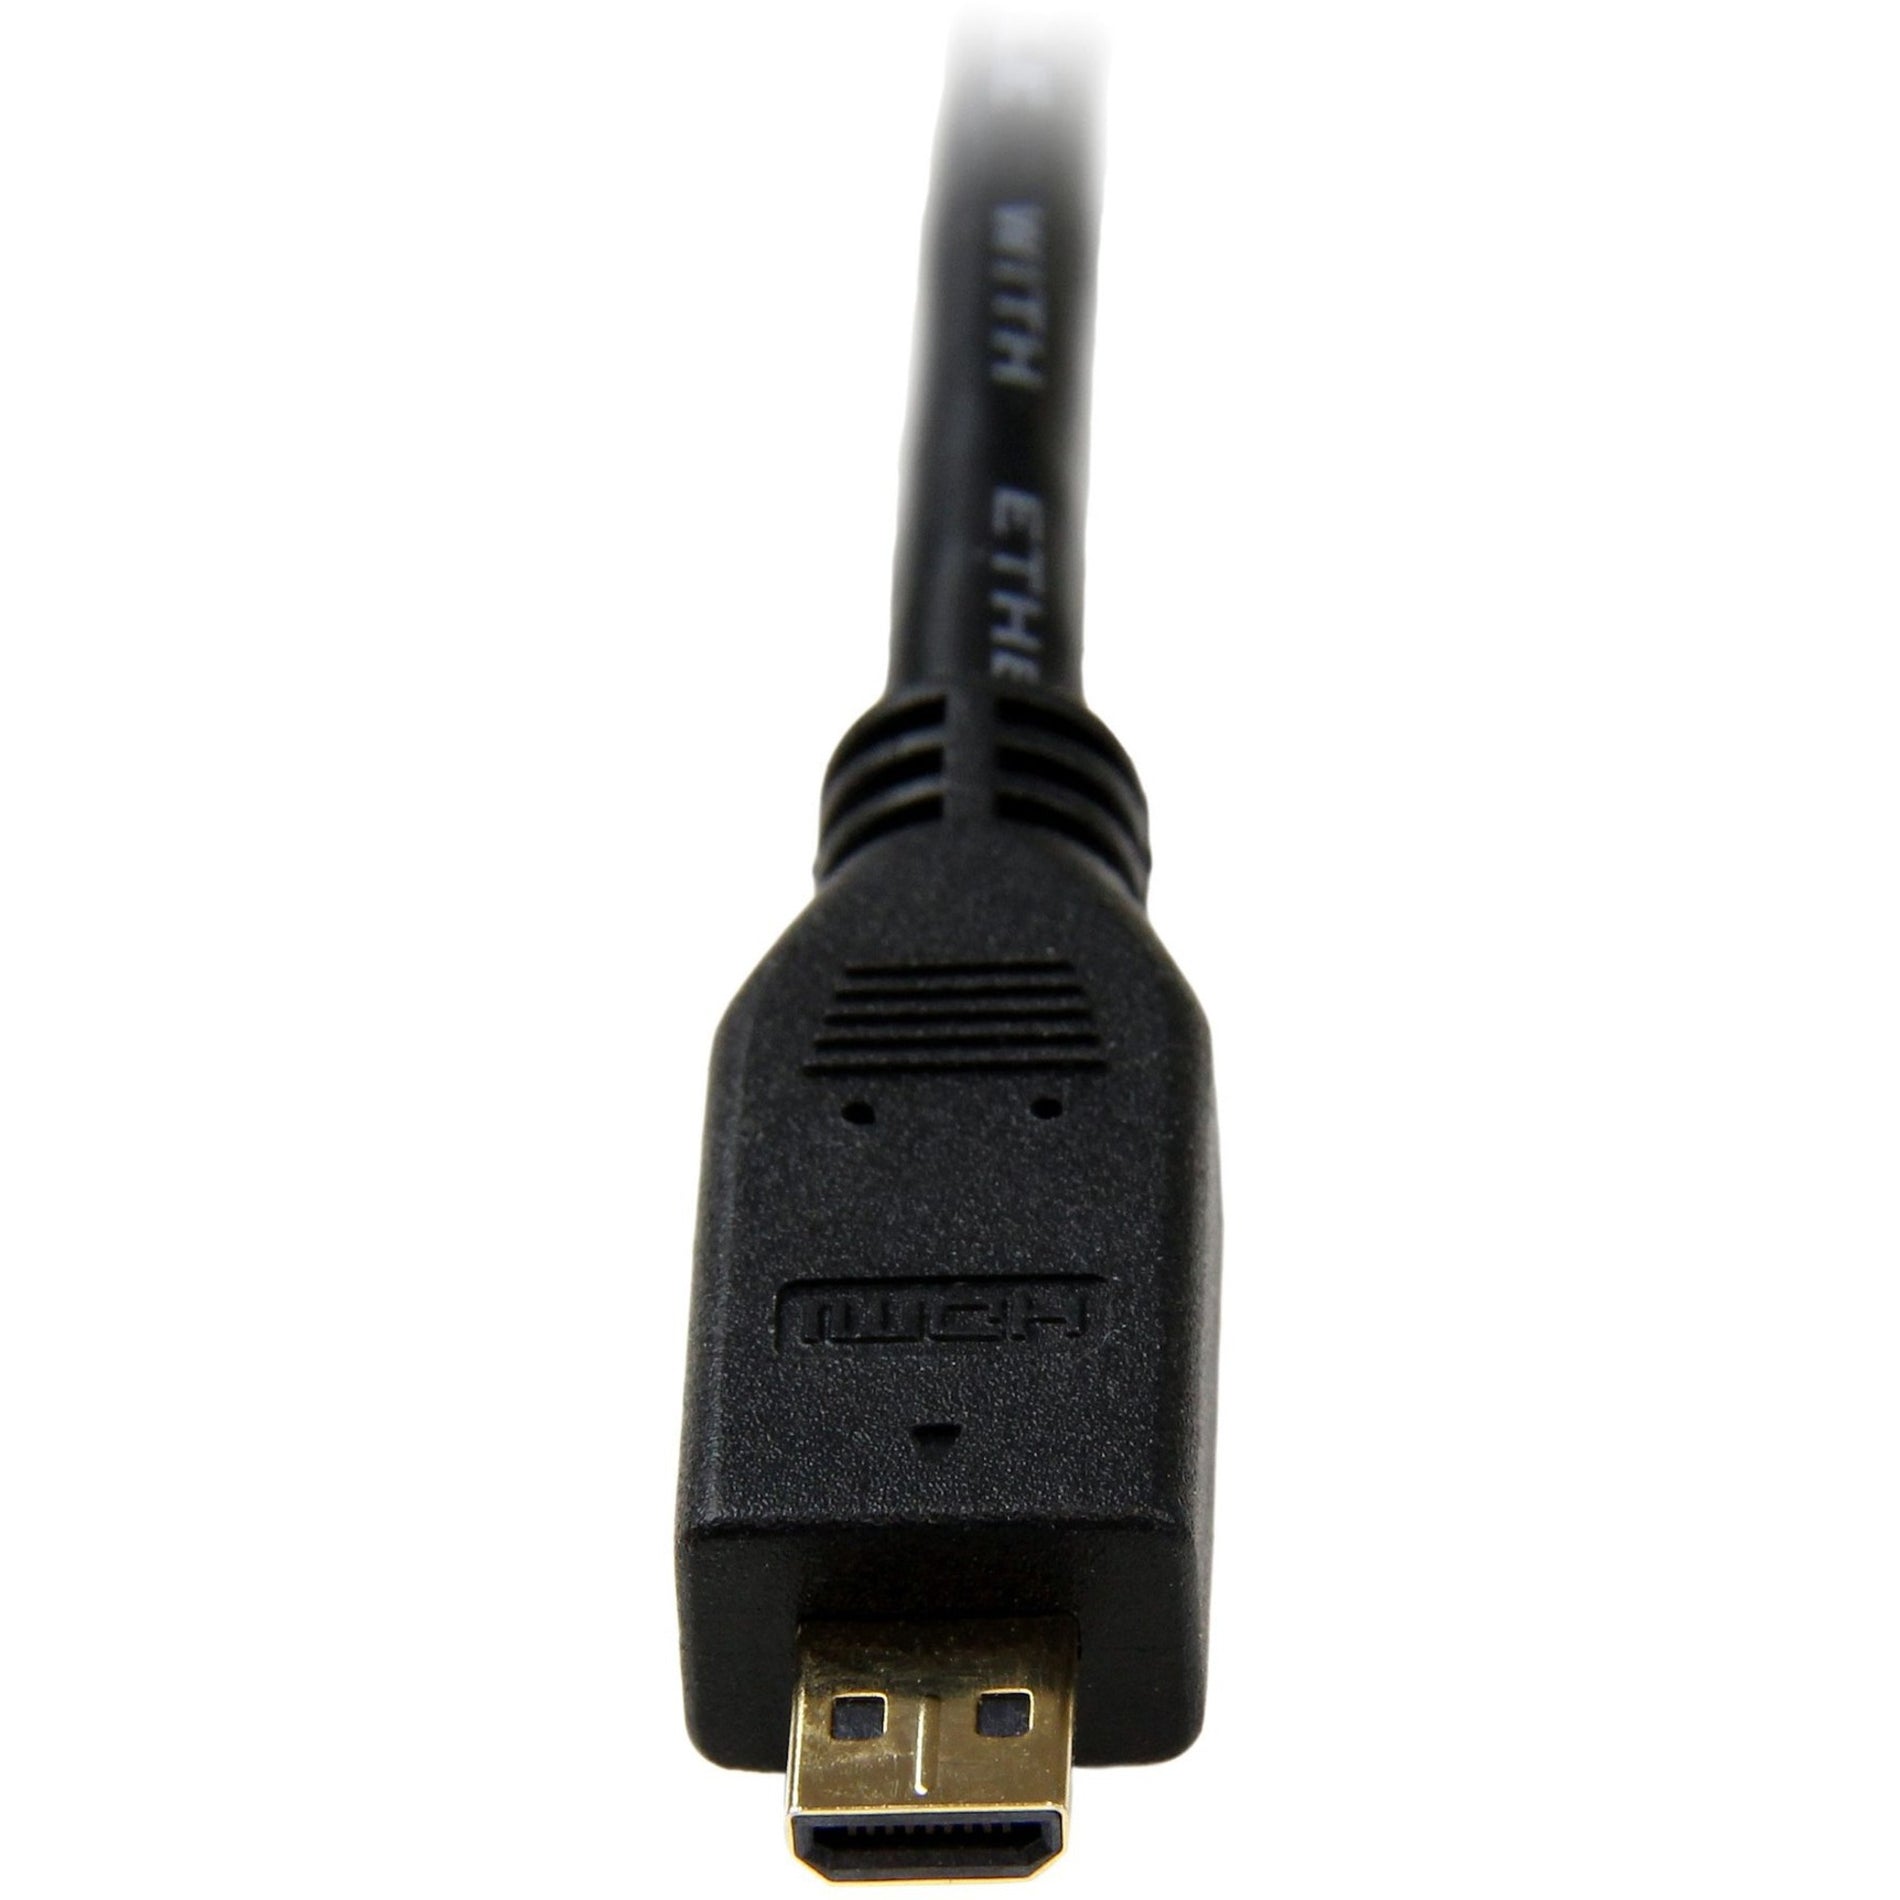 StarTech.com HDMIADMM3 3 ft High Speed HDMI Cable with Ethernet - HDMI to HDMI Micro - M/M 4K Supported Gold Plated Connectors Black Startech.com HDMIADMM3 3フィート ハイスピード HDMIケーブル イーサネット対応 - HDMI to HDMI Micro - M/M 4K対応 ゴールドプレーテッドコネクタ ブラック